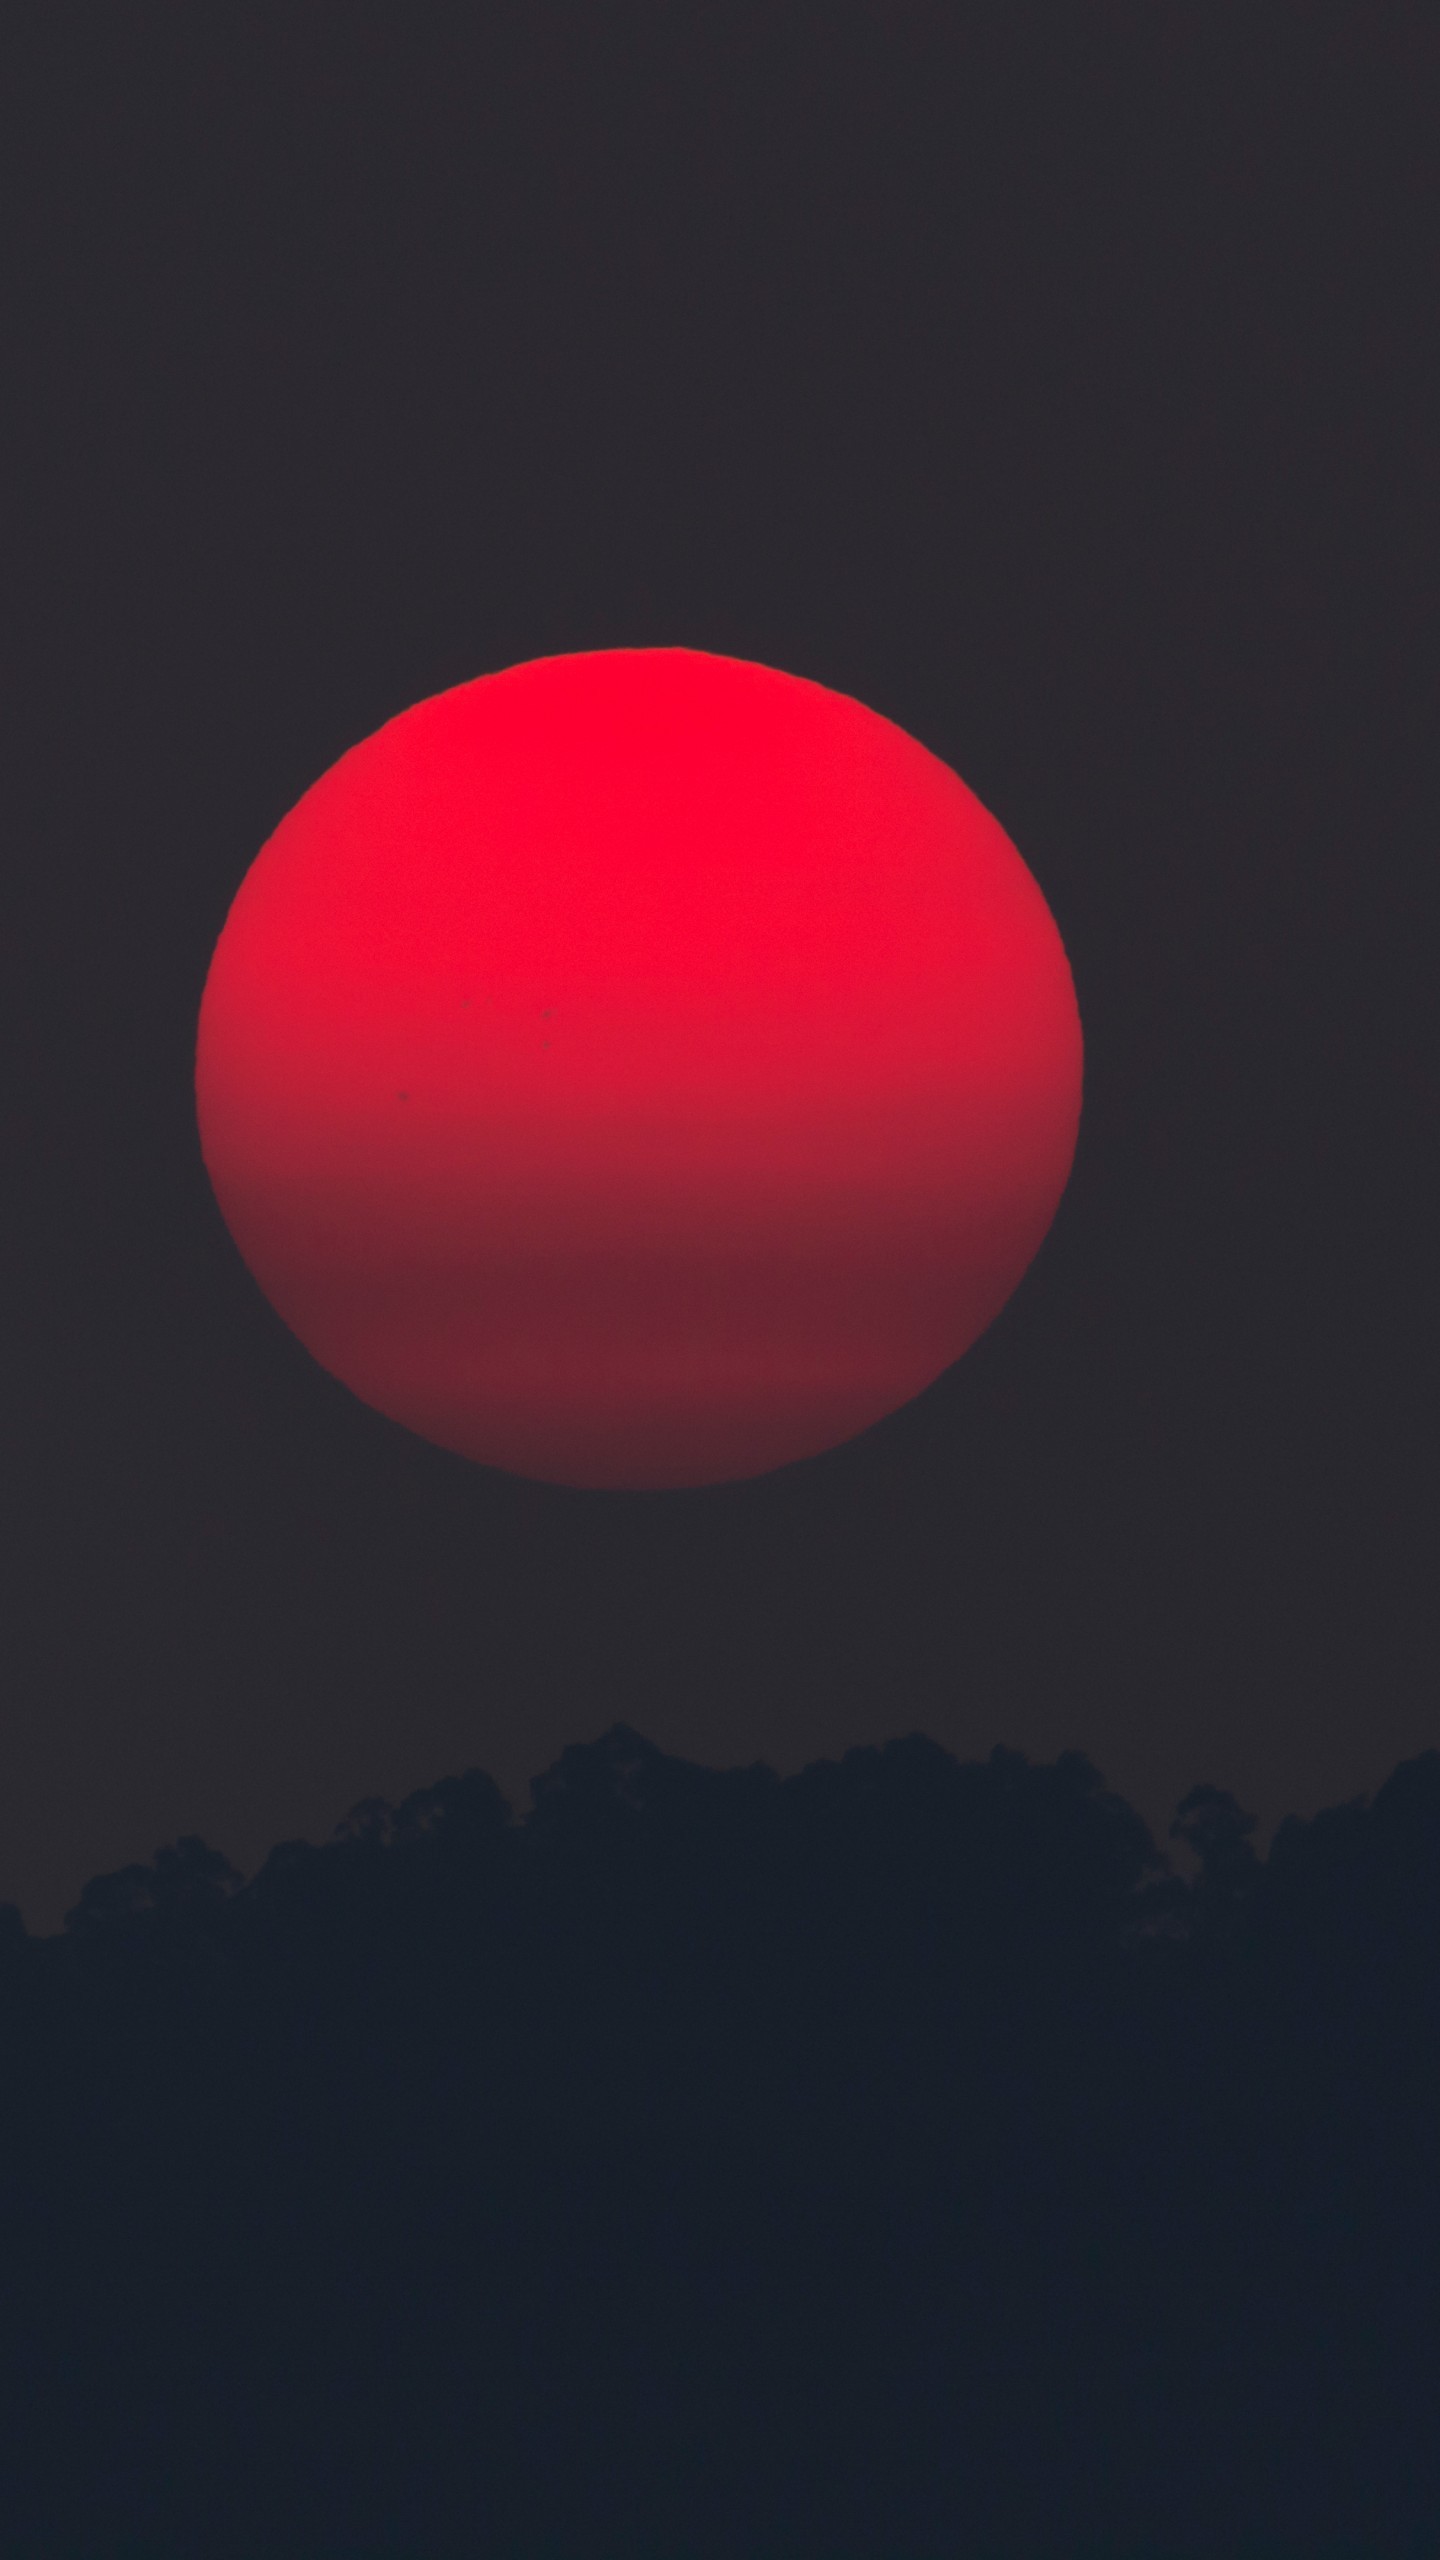 1440x2560 Wallpaper red moon full moon sunset nature jpg  Iphone red moon  wallpapers fantasy unique